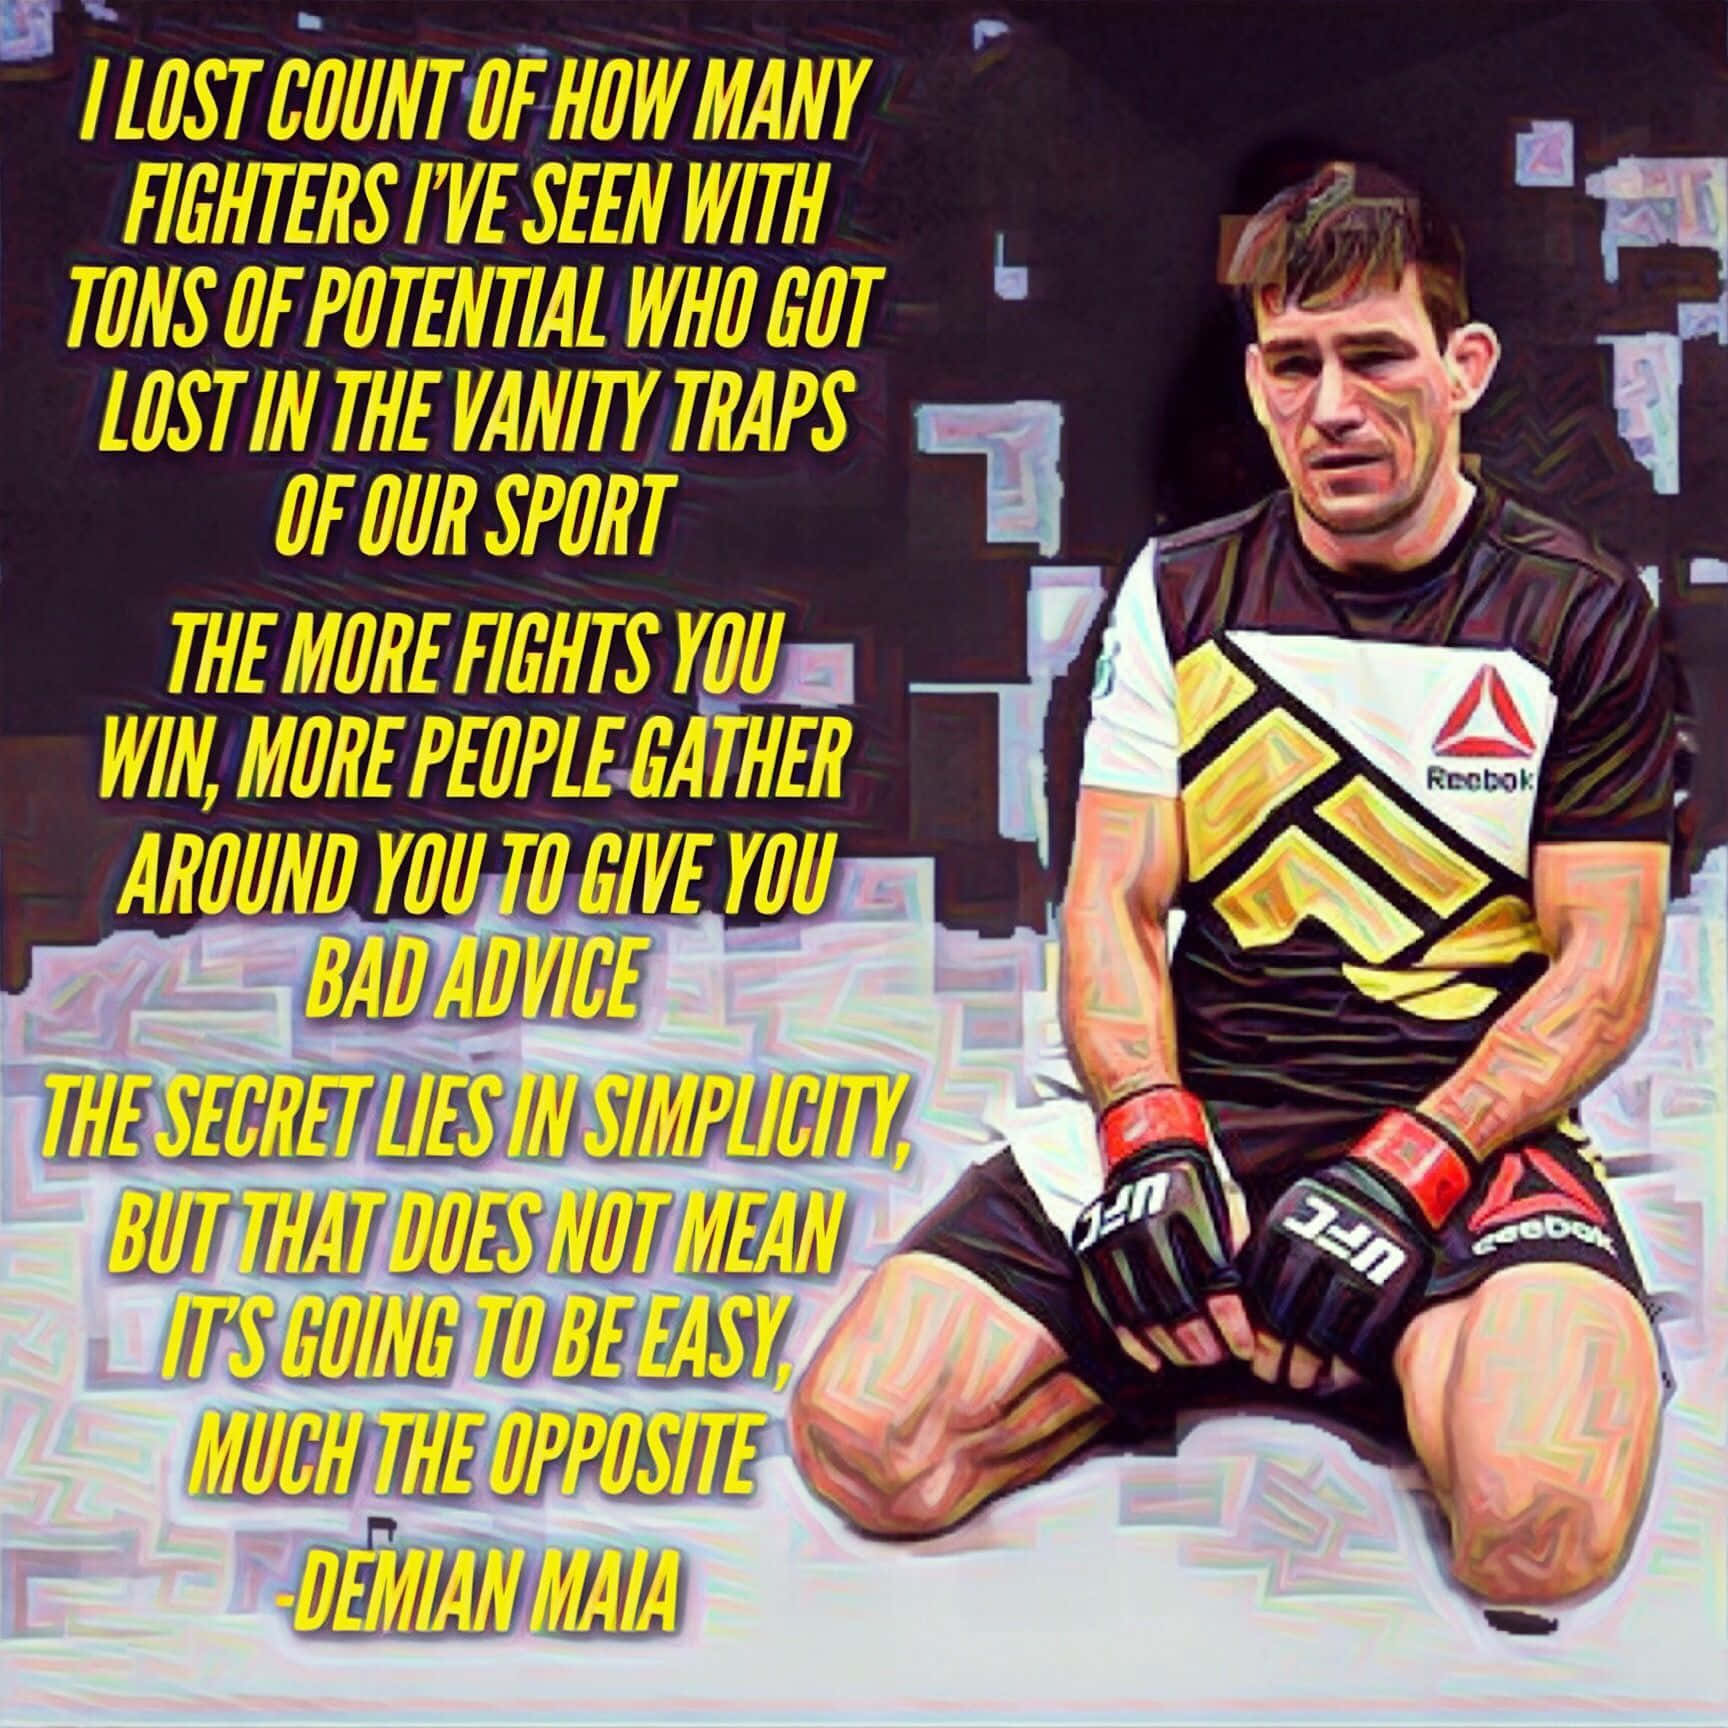 Demianmaia Ufc Submission Grappler: Demian Maia Ufc Submission Grappler Wallpaper